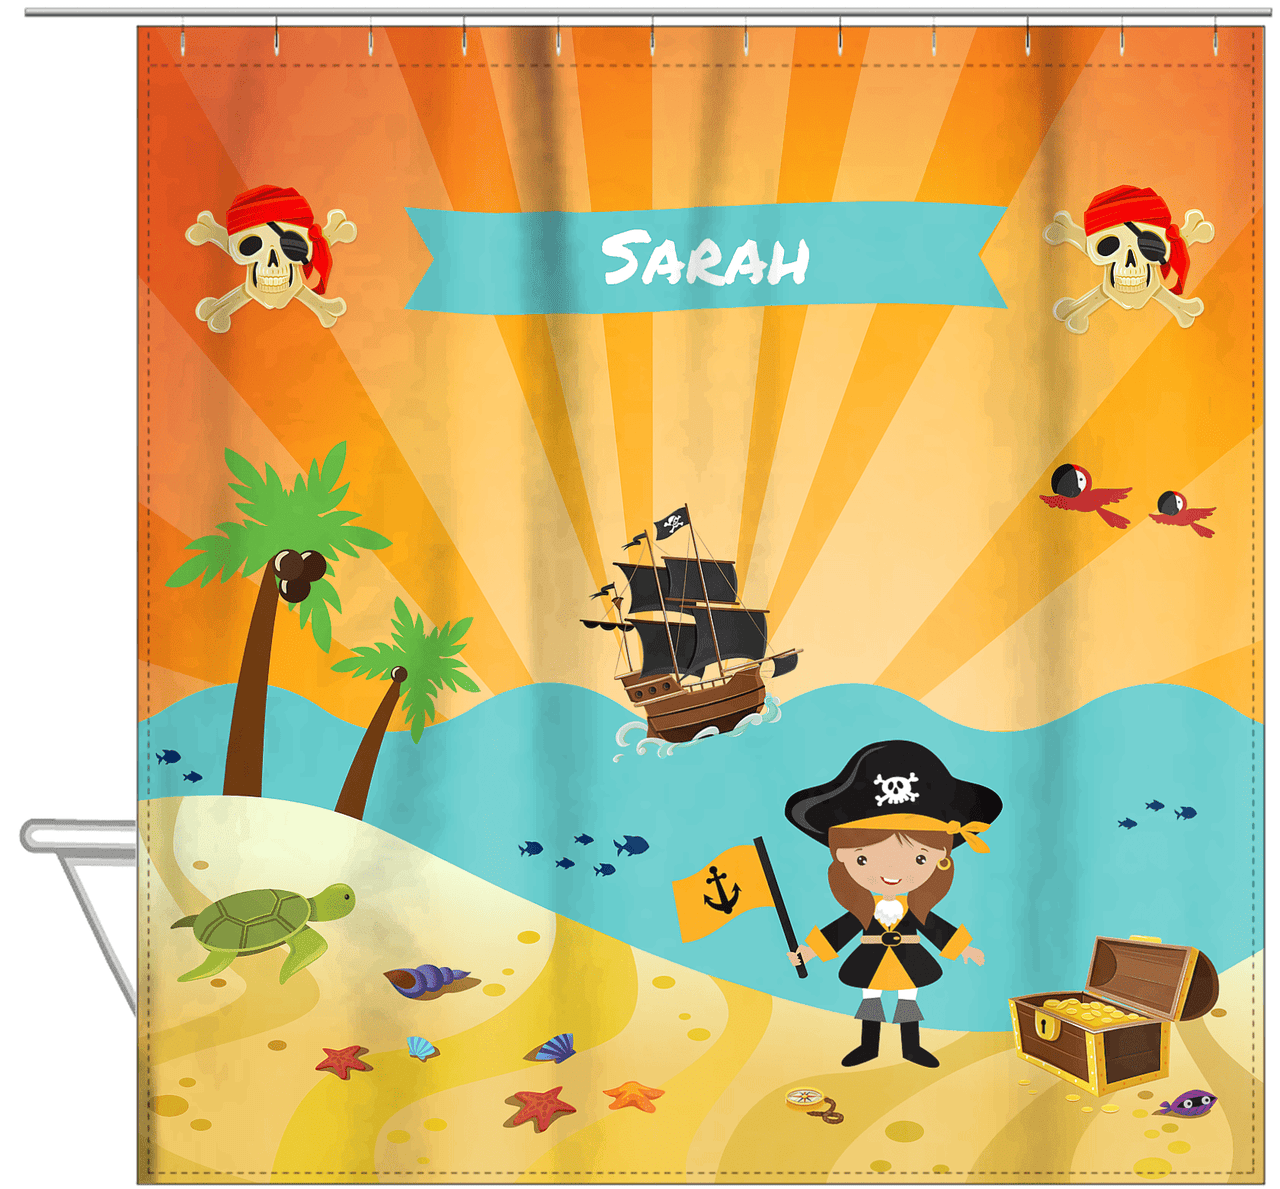 Personalized Pirate Shower Curtain XI - Orange Background - Brunette Girl with Flag - Hanging View